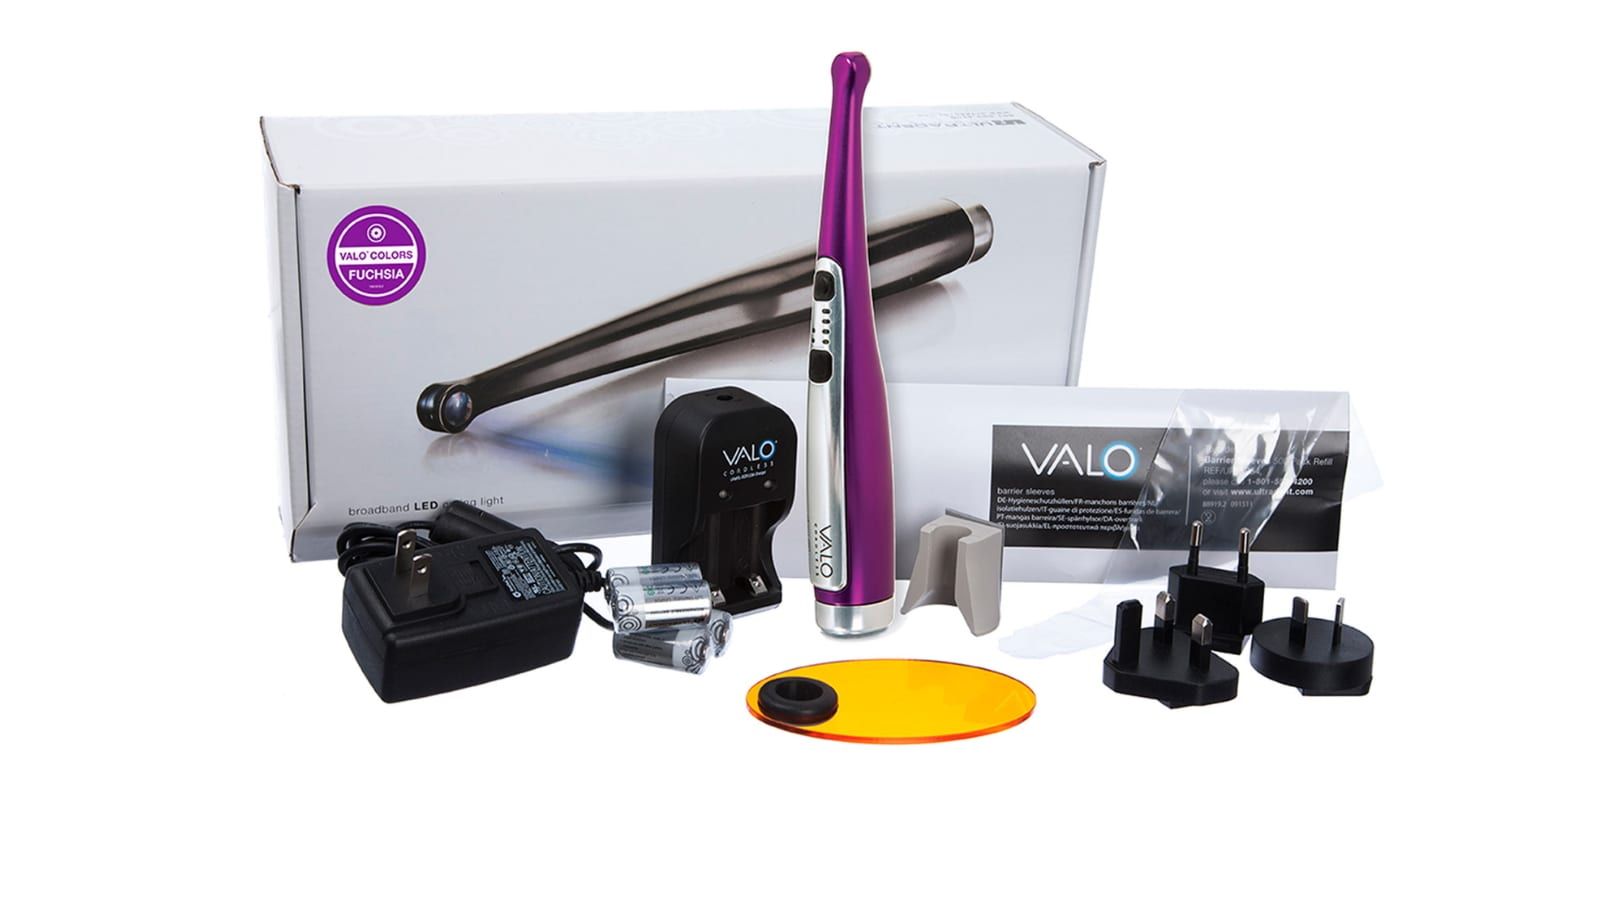 Valo cordless by ultradent